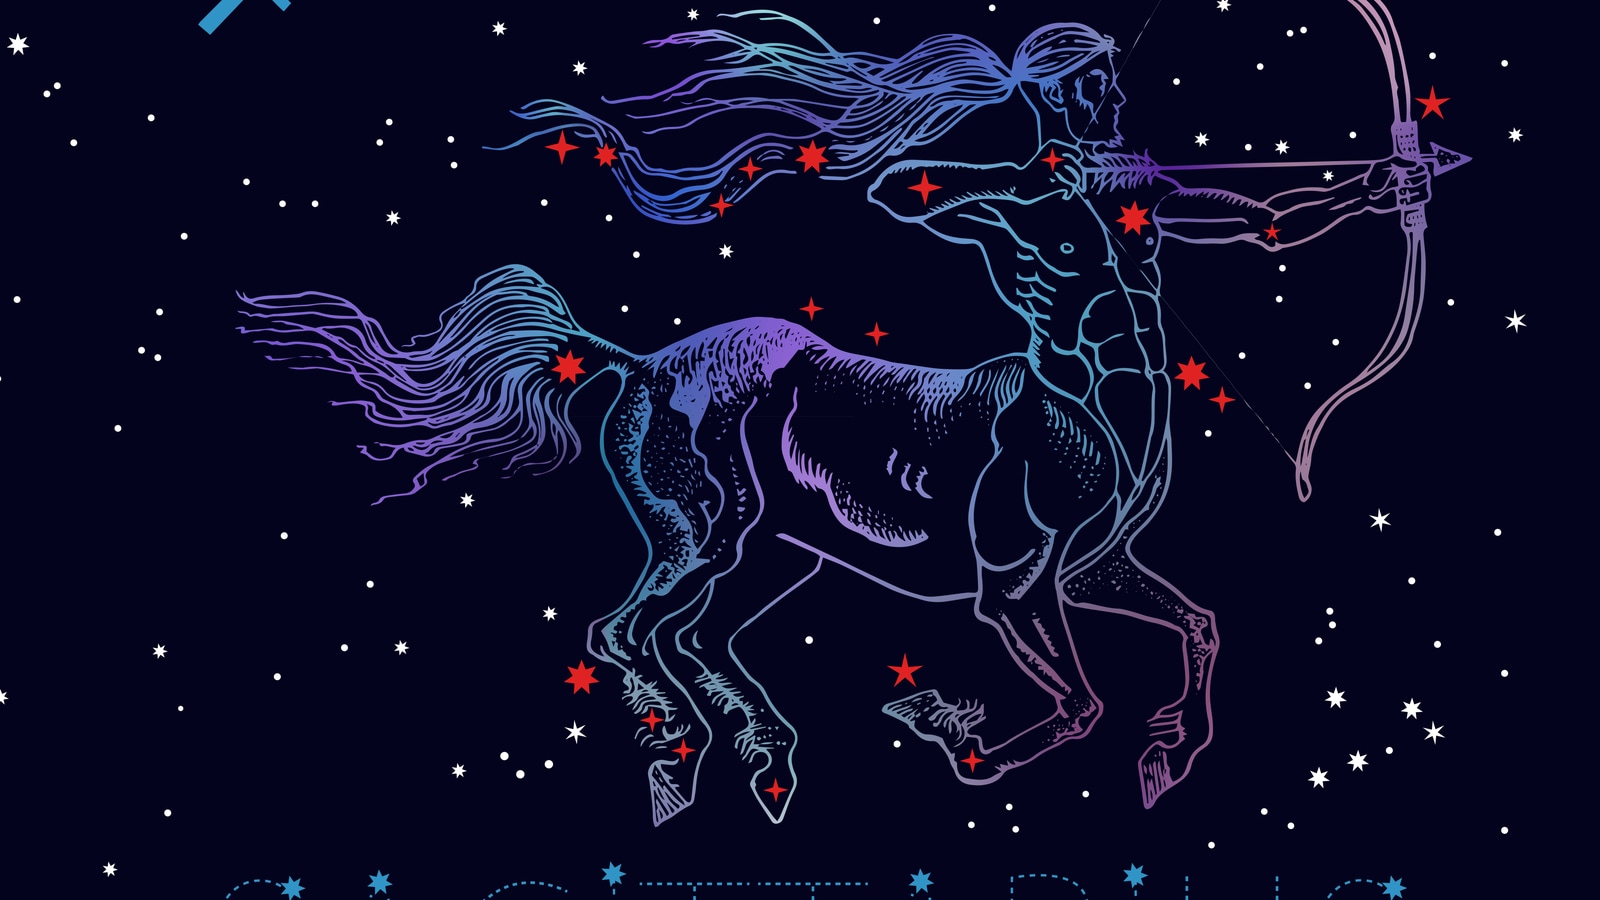 Sagittarius Horoscope predictions for March 20 You'll be in a peaceful